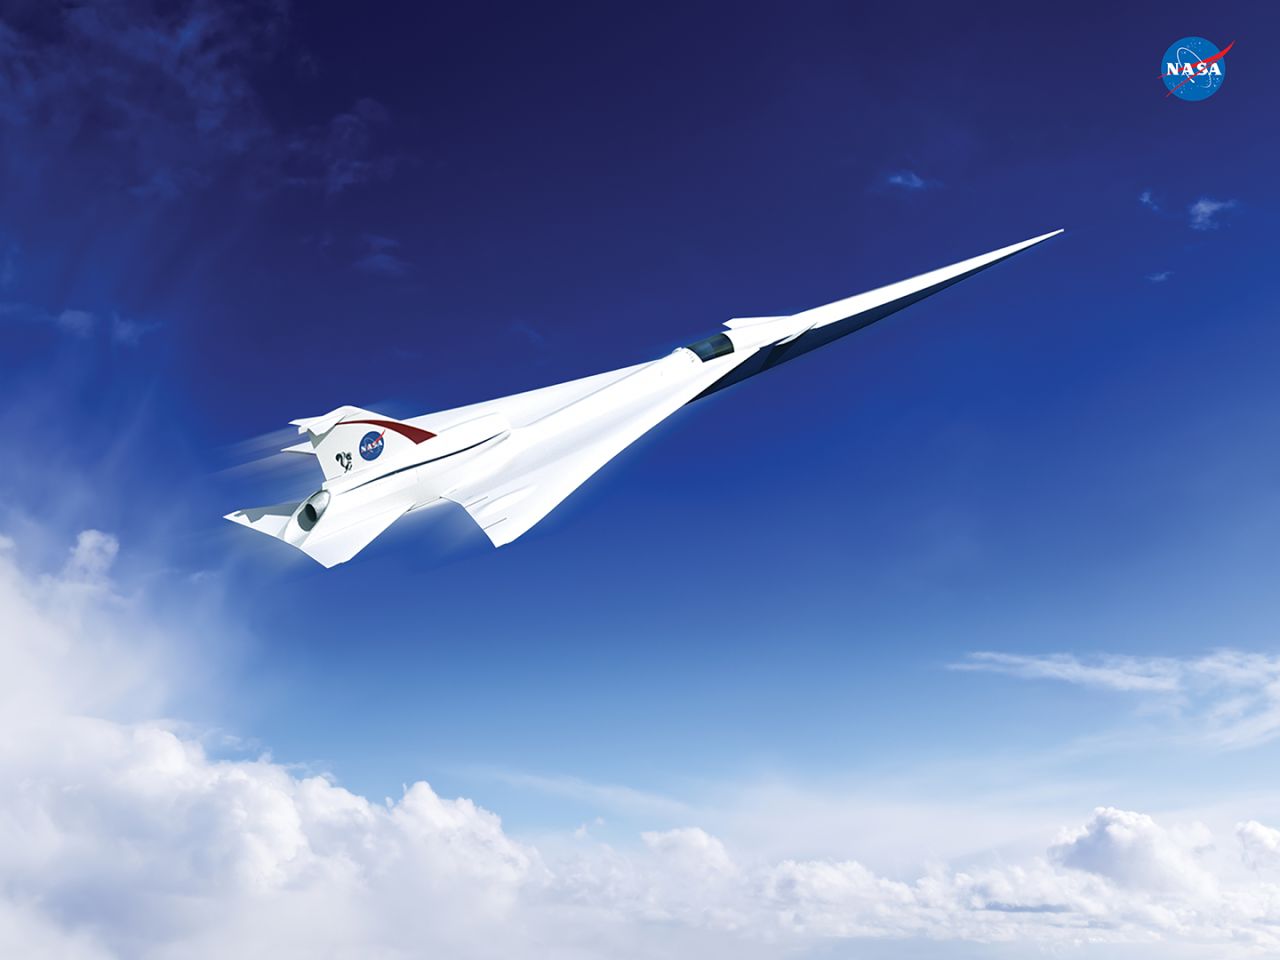 If realized, NASA's Low Boom Flight Demonstration Quiet Supersonic Transport (QueSST) X-plane design will be part of a new generation of more efficient, quieter supersonic airliners. These could revive commercial supersonic air travel as a viable proposition.